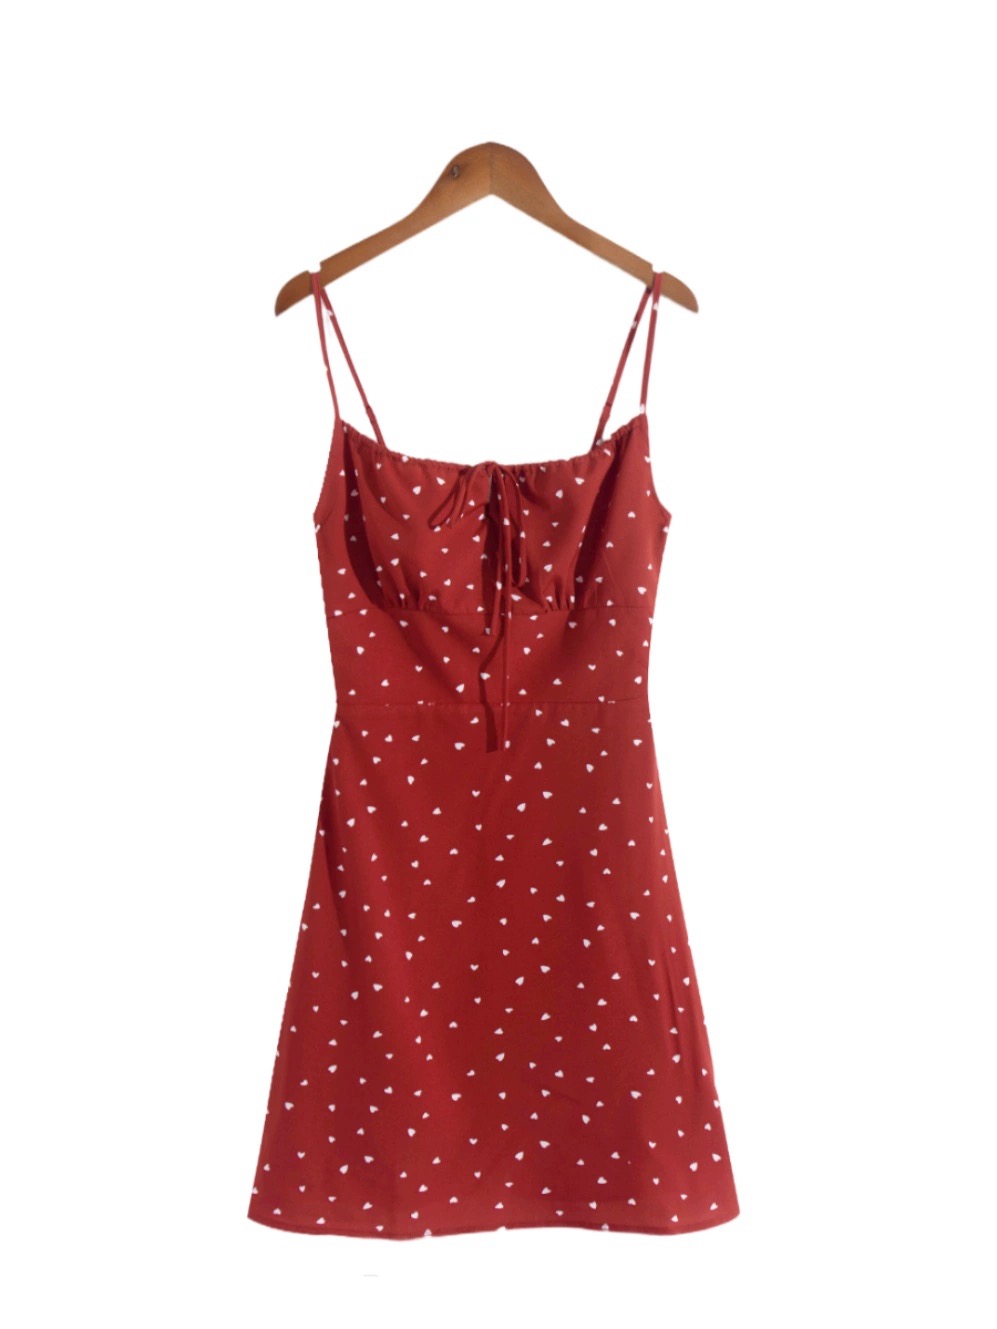 Retro, Sweet And Spicy Girly Heart Pattern Slim Suspender Dress, Travel Vacation Backless Dress